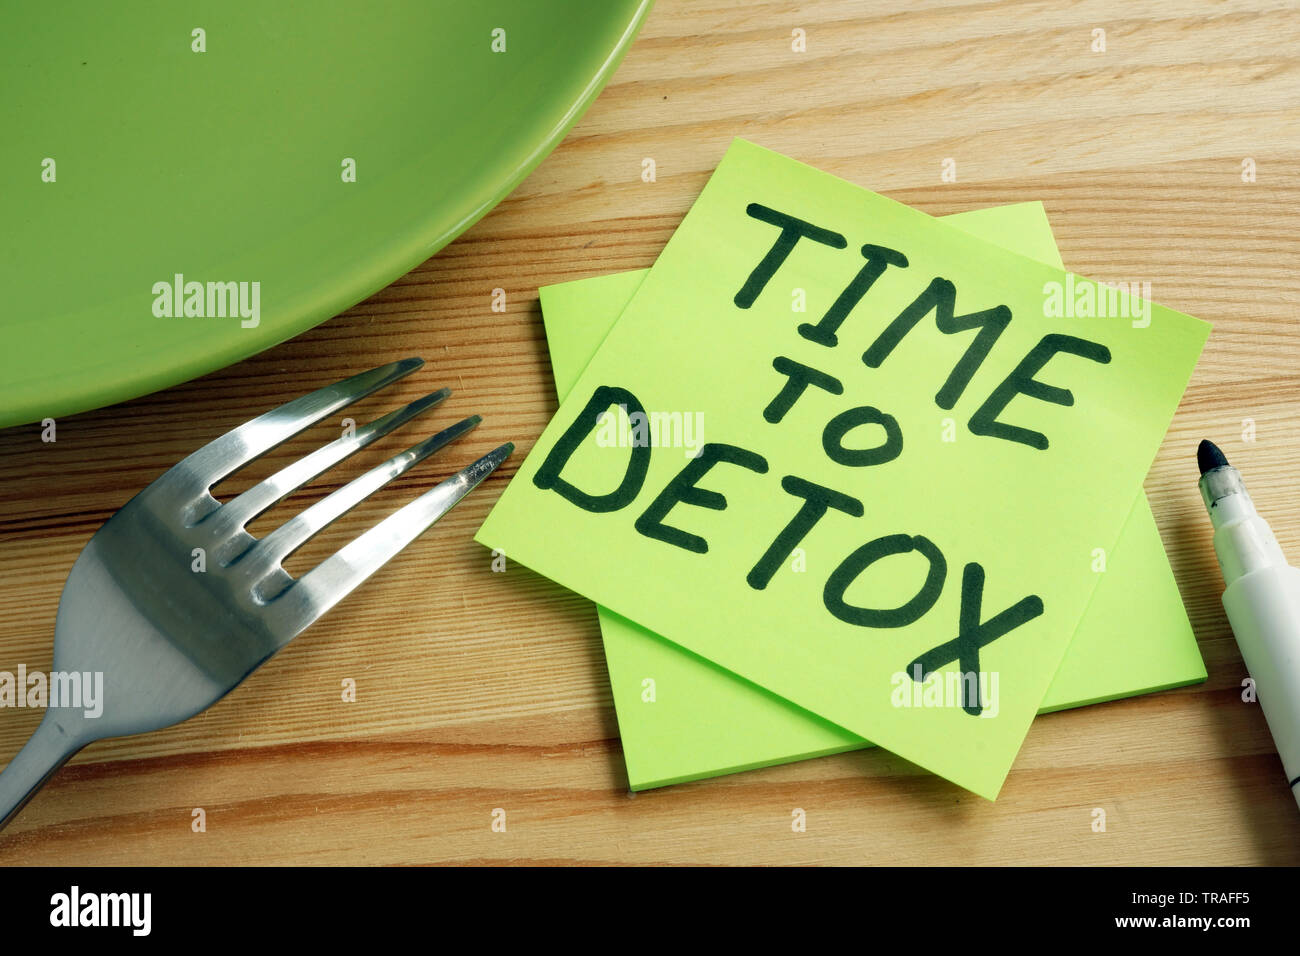 Time to detox concept. Fork and green plate on table. Stock Photo